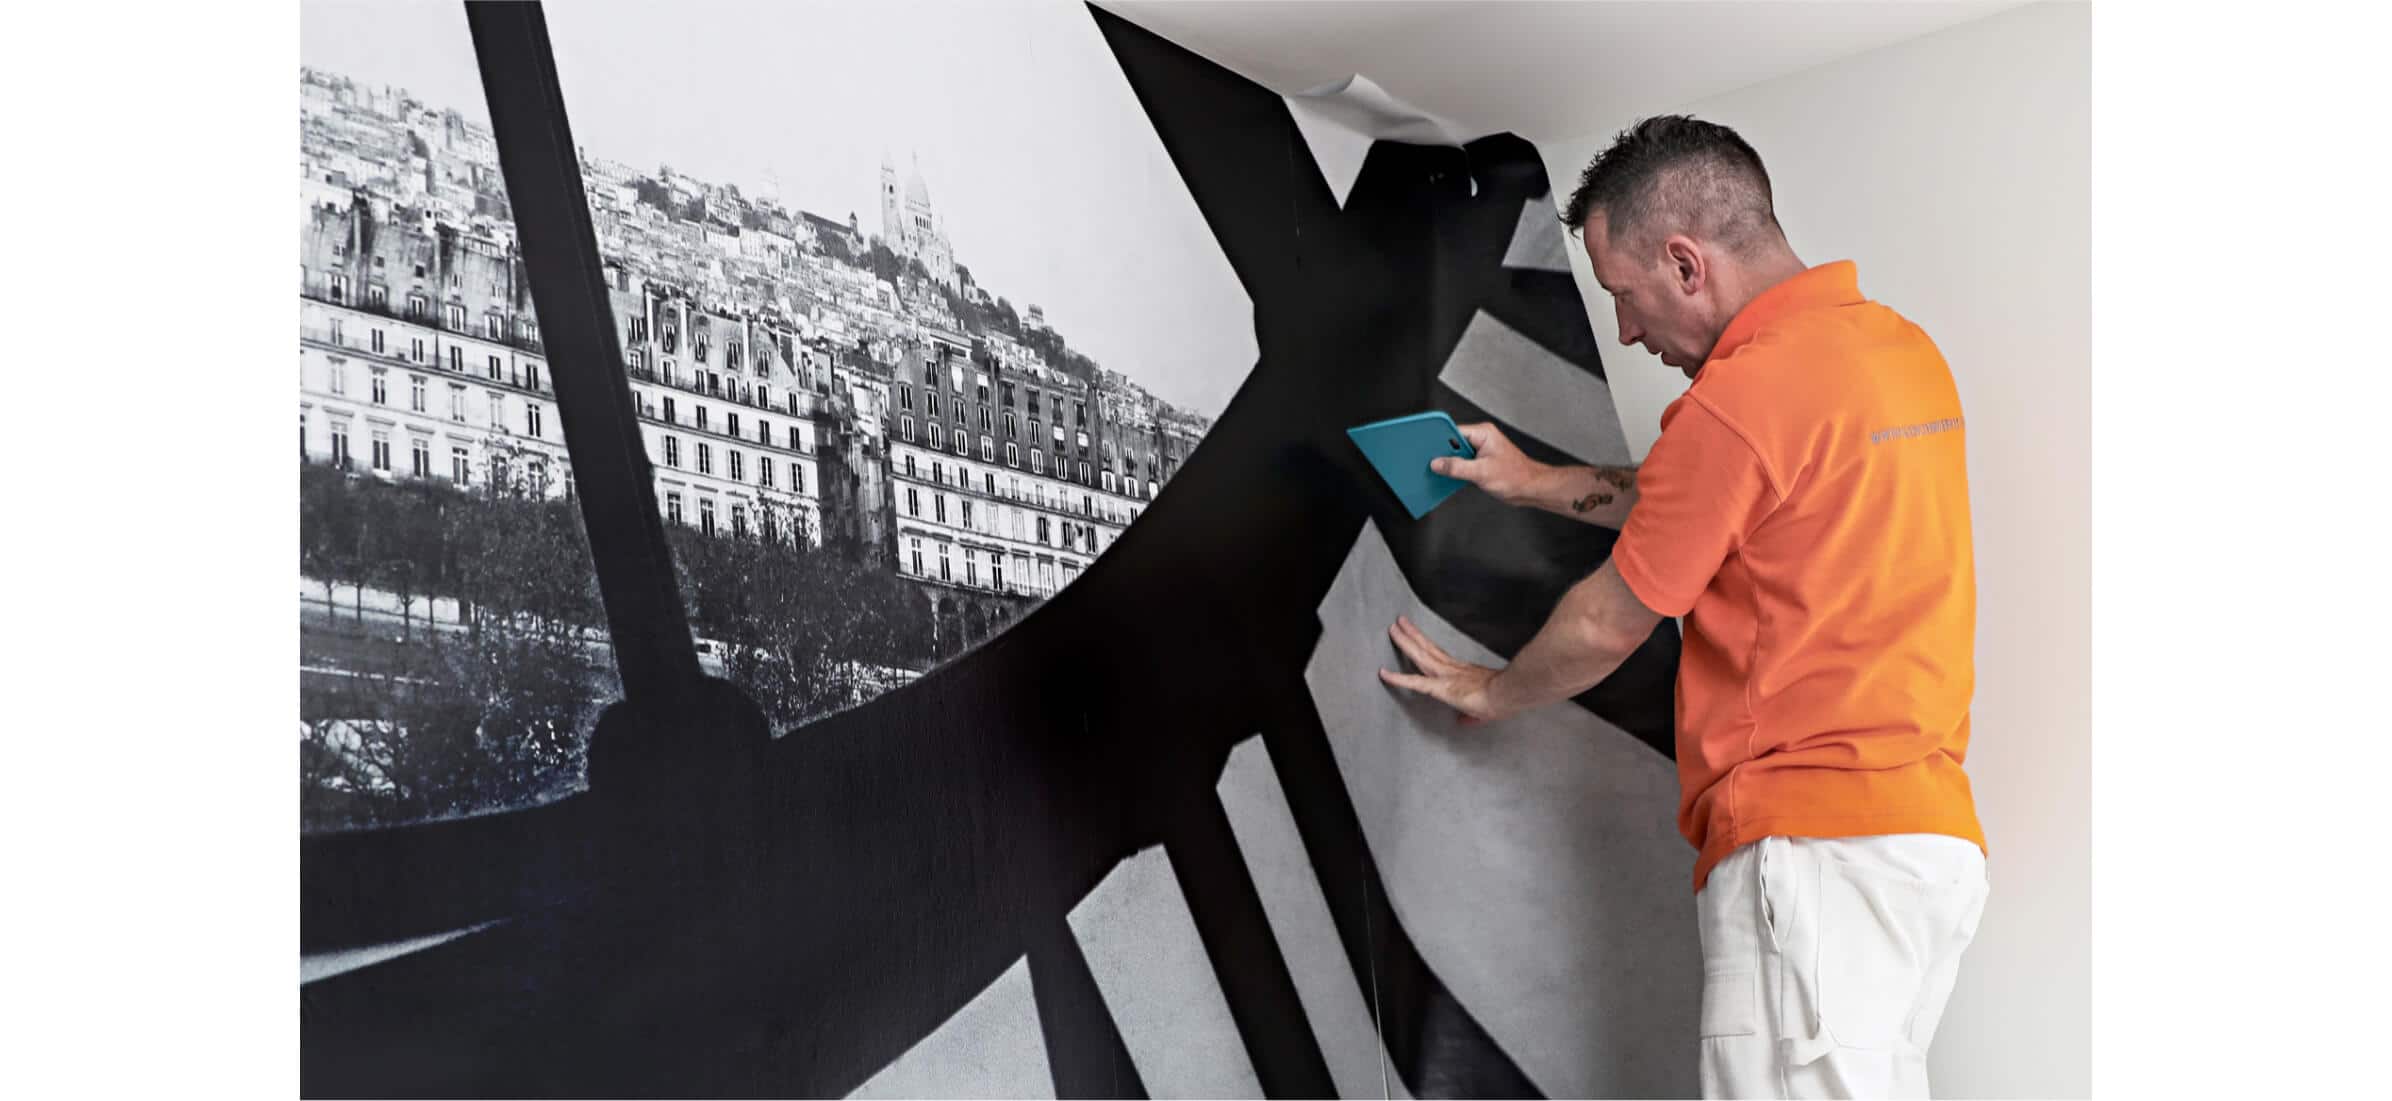 Paul Walden installing wallpaper featuring a black and white image of London.